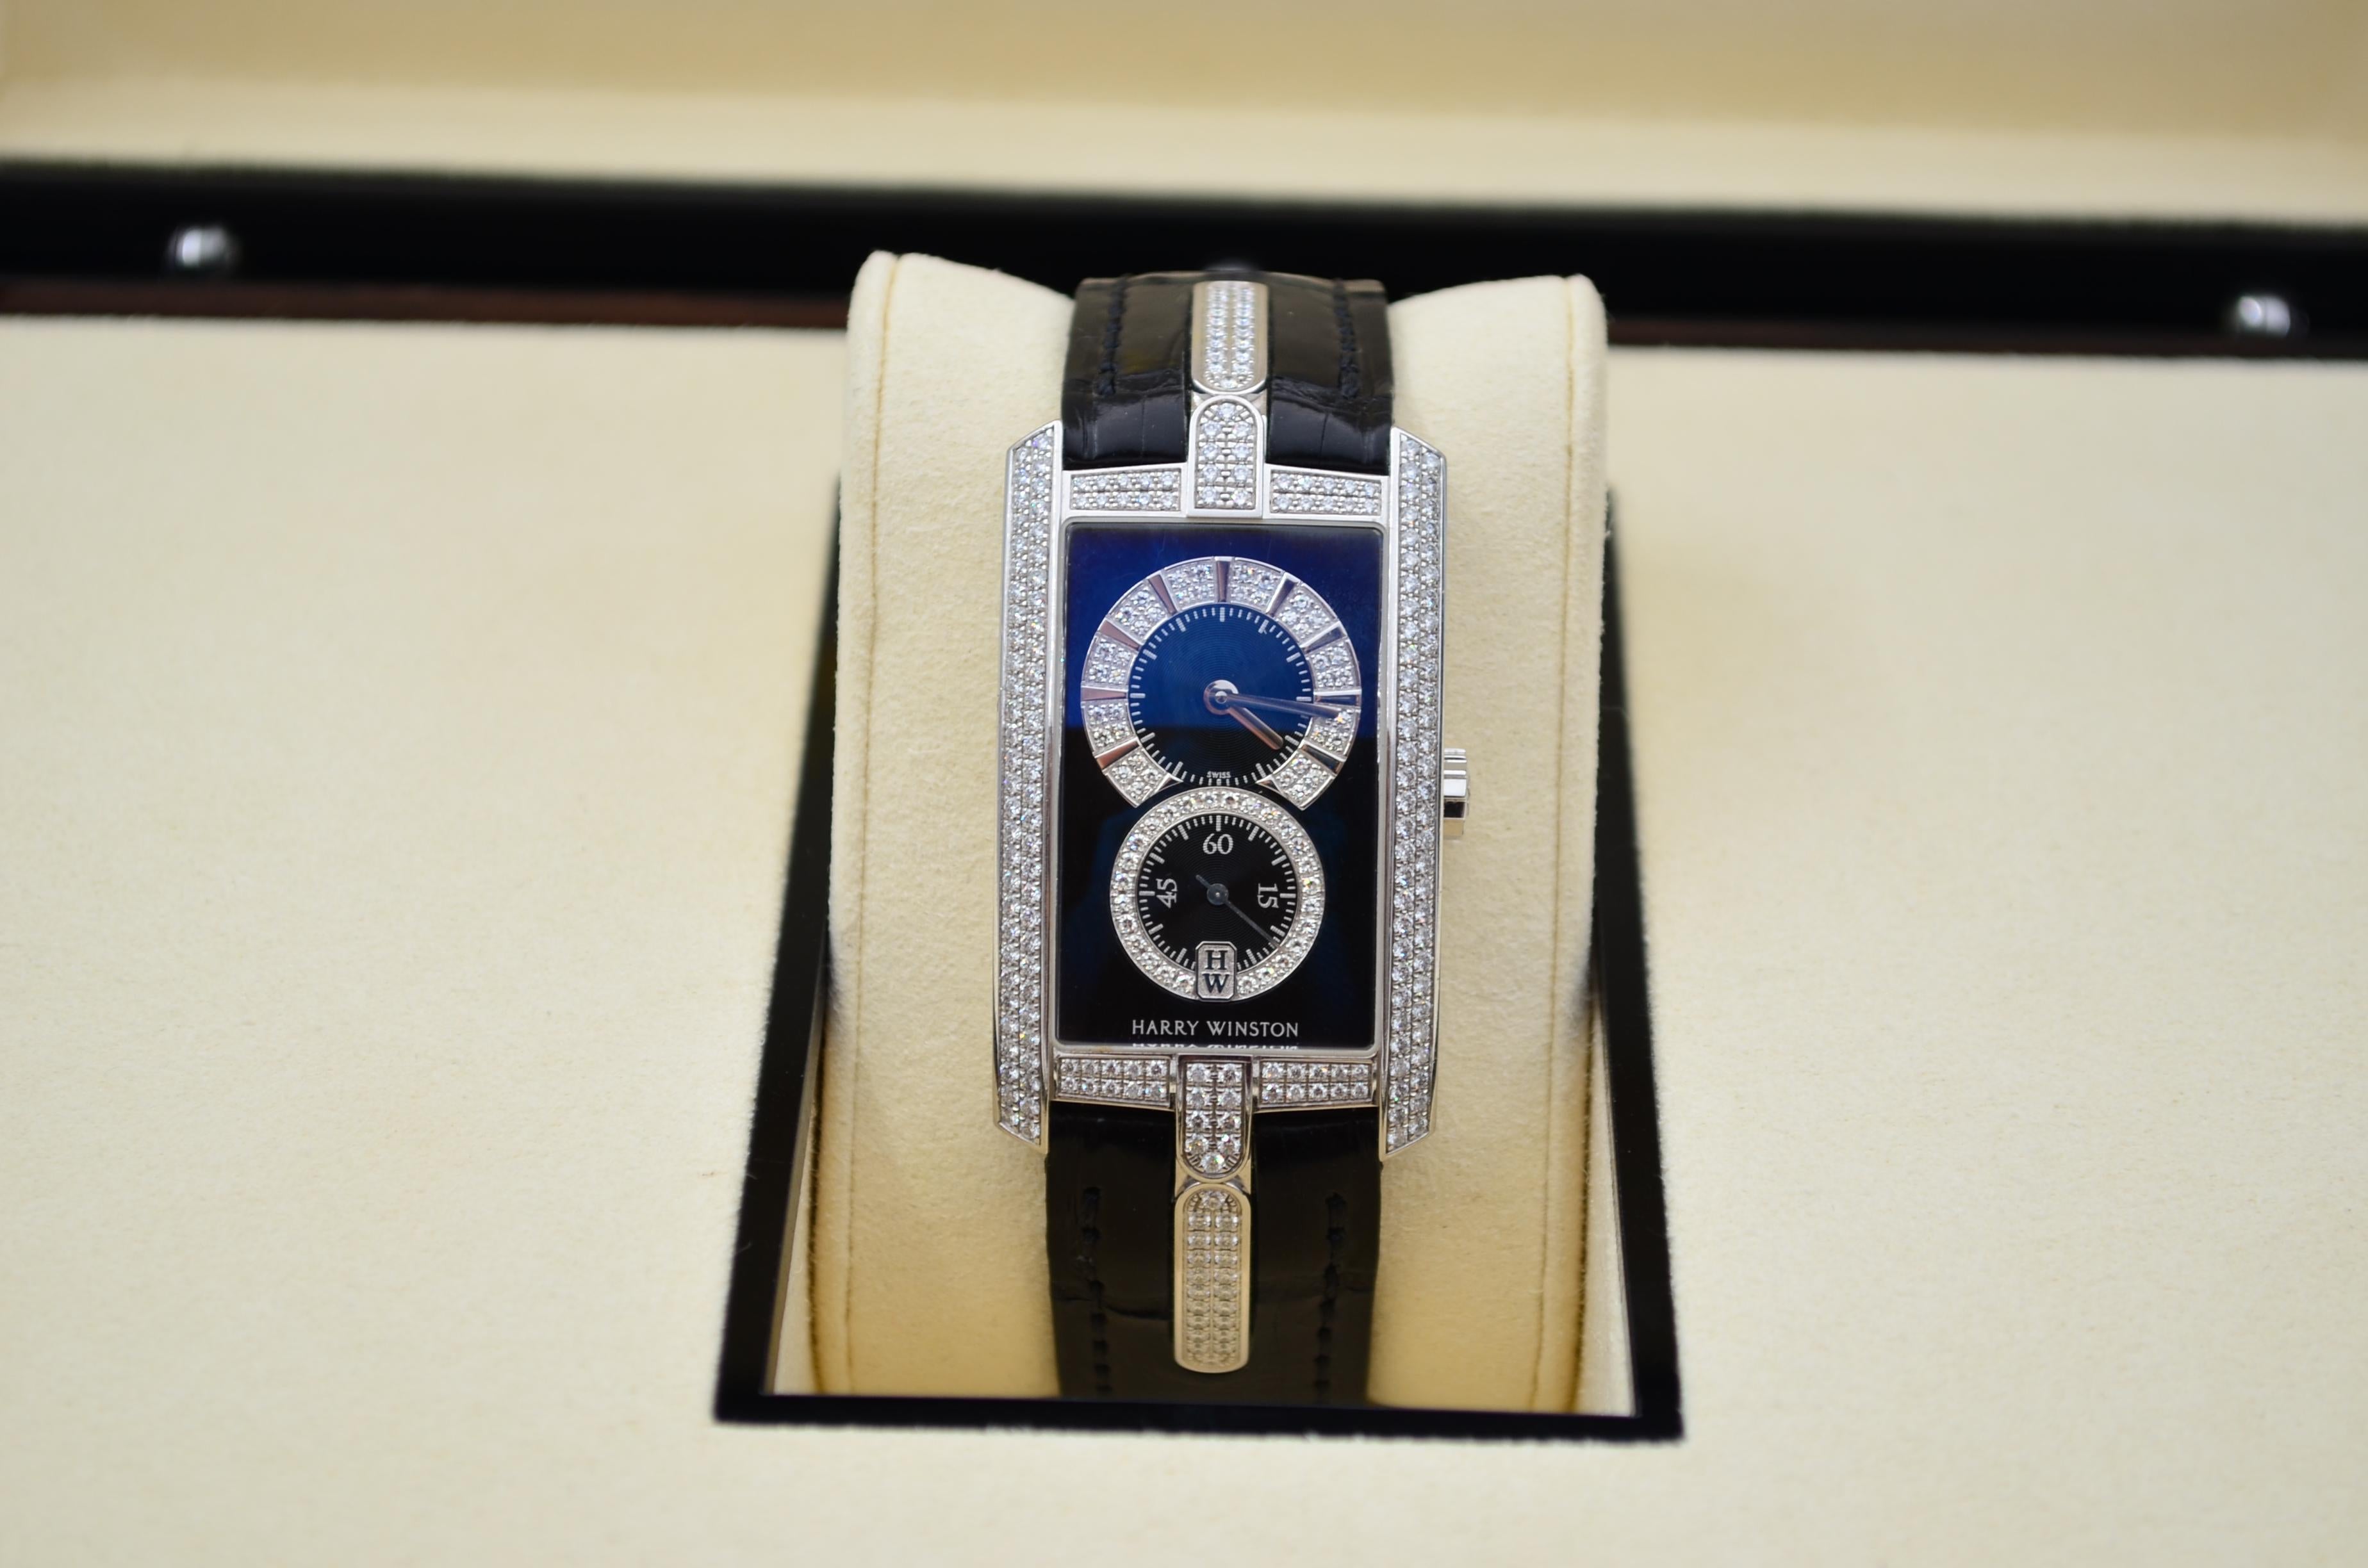 The watch is in a very good condition and it’s working well. It shows slight signs of wear and scratches. The watch comes with an AGS Jewelry wooden box, along with an AGS Jewelry warranty card.  Harry Winston is a prestigious American luxury